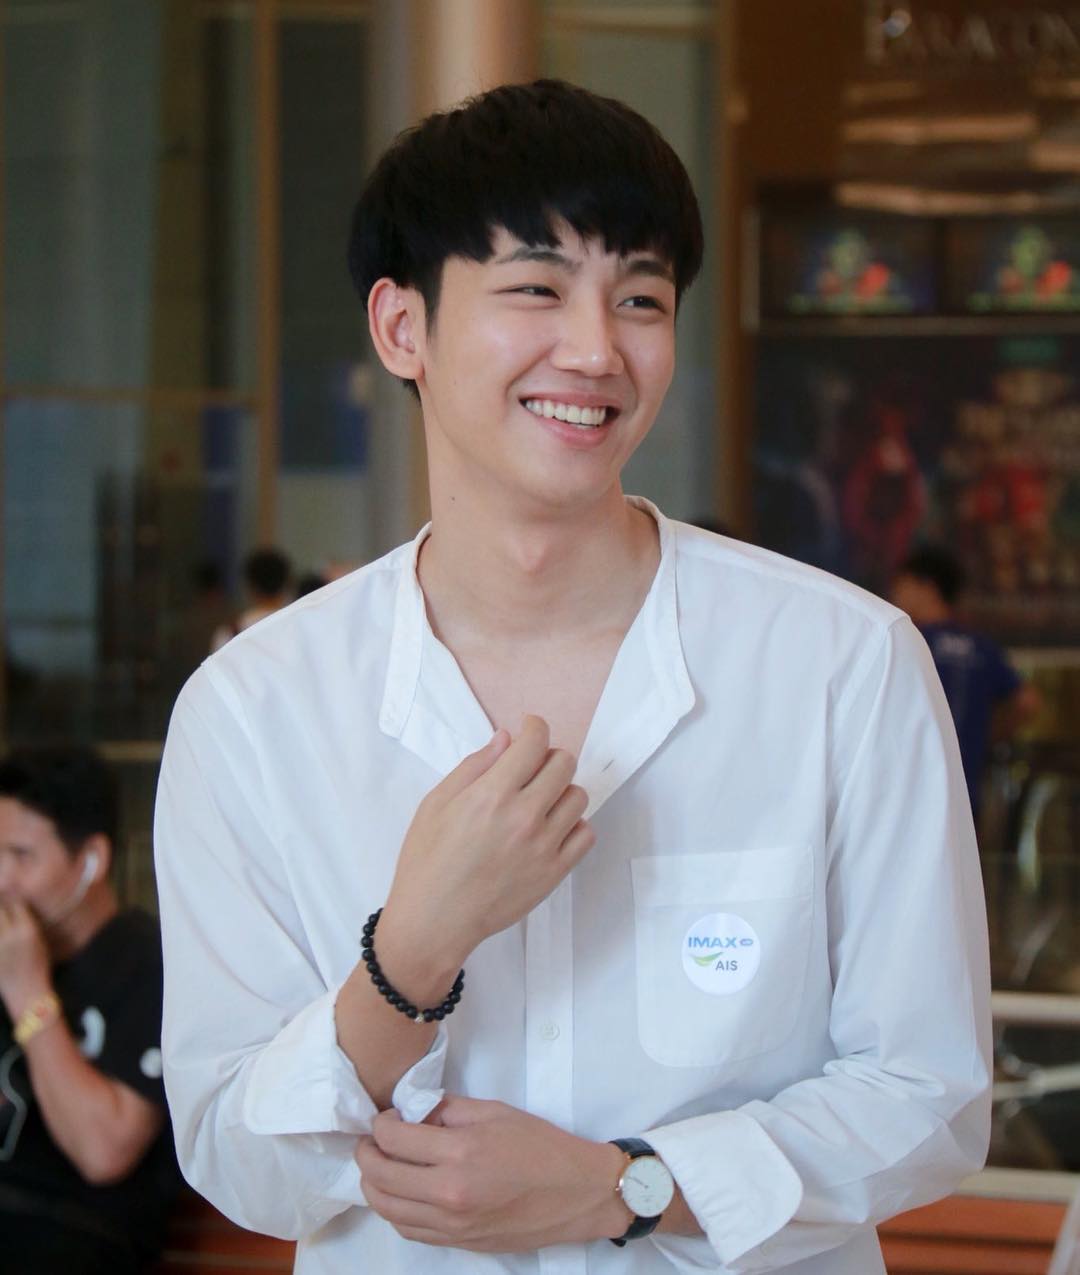 me wuv you: Title Kirati Puangmalee Profile and Facts